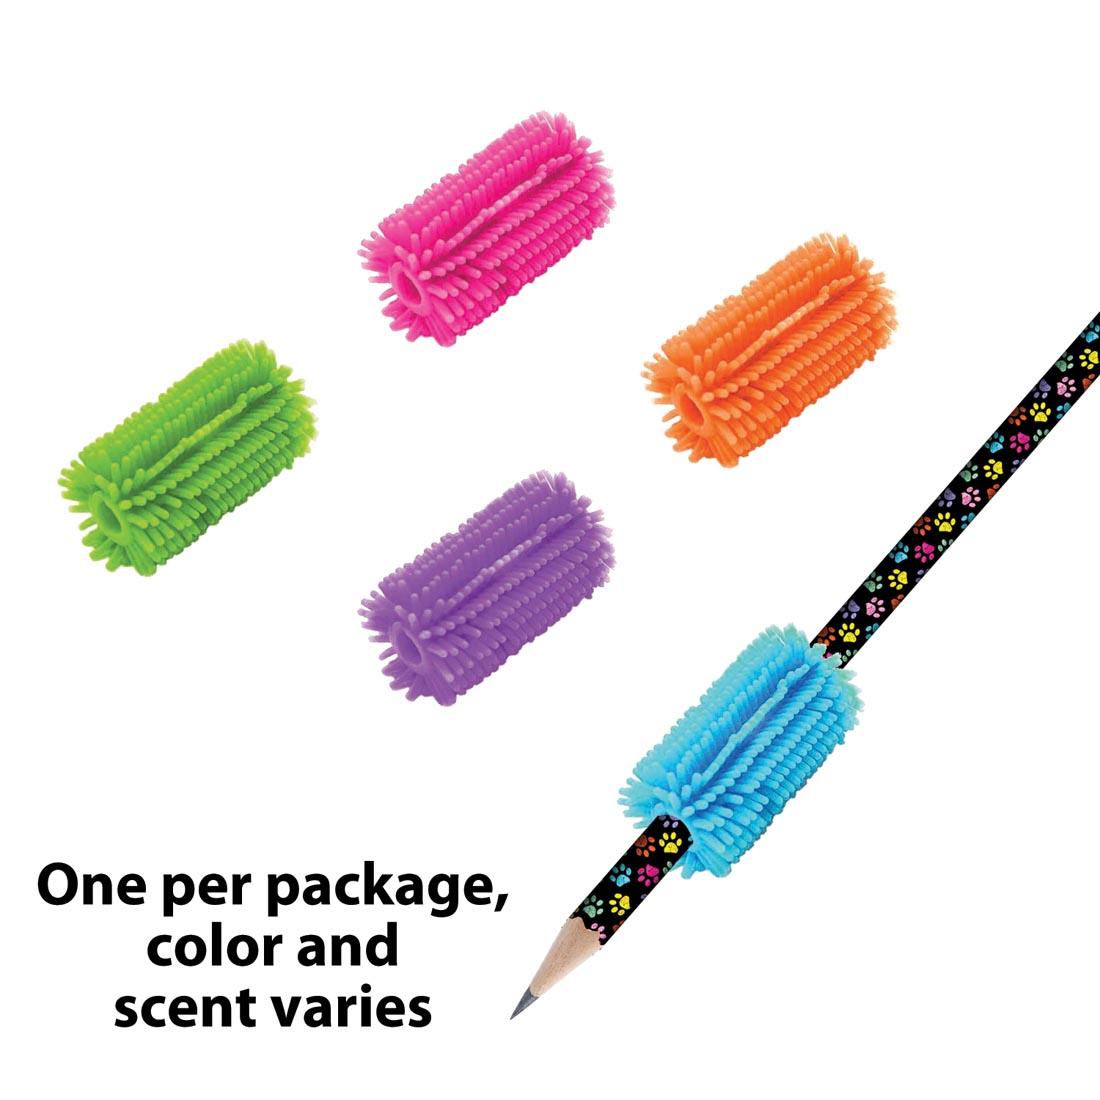 Four Scented Griptastic Pencil Gripz plus one on a pencil and the text One per package, color and scent varies